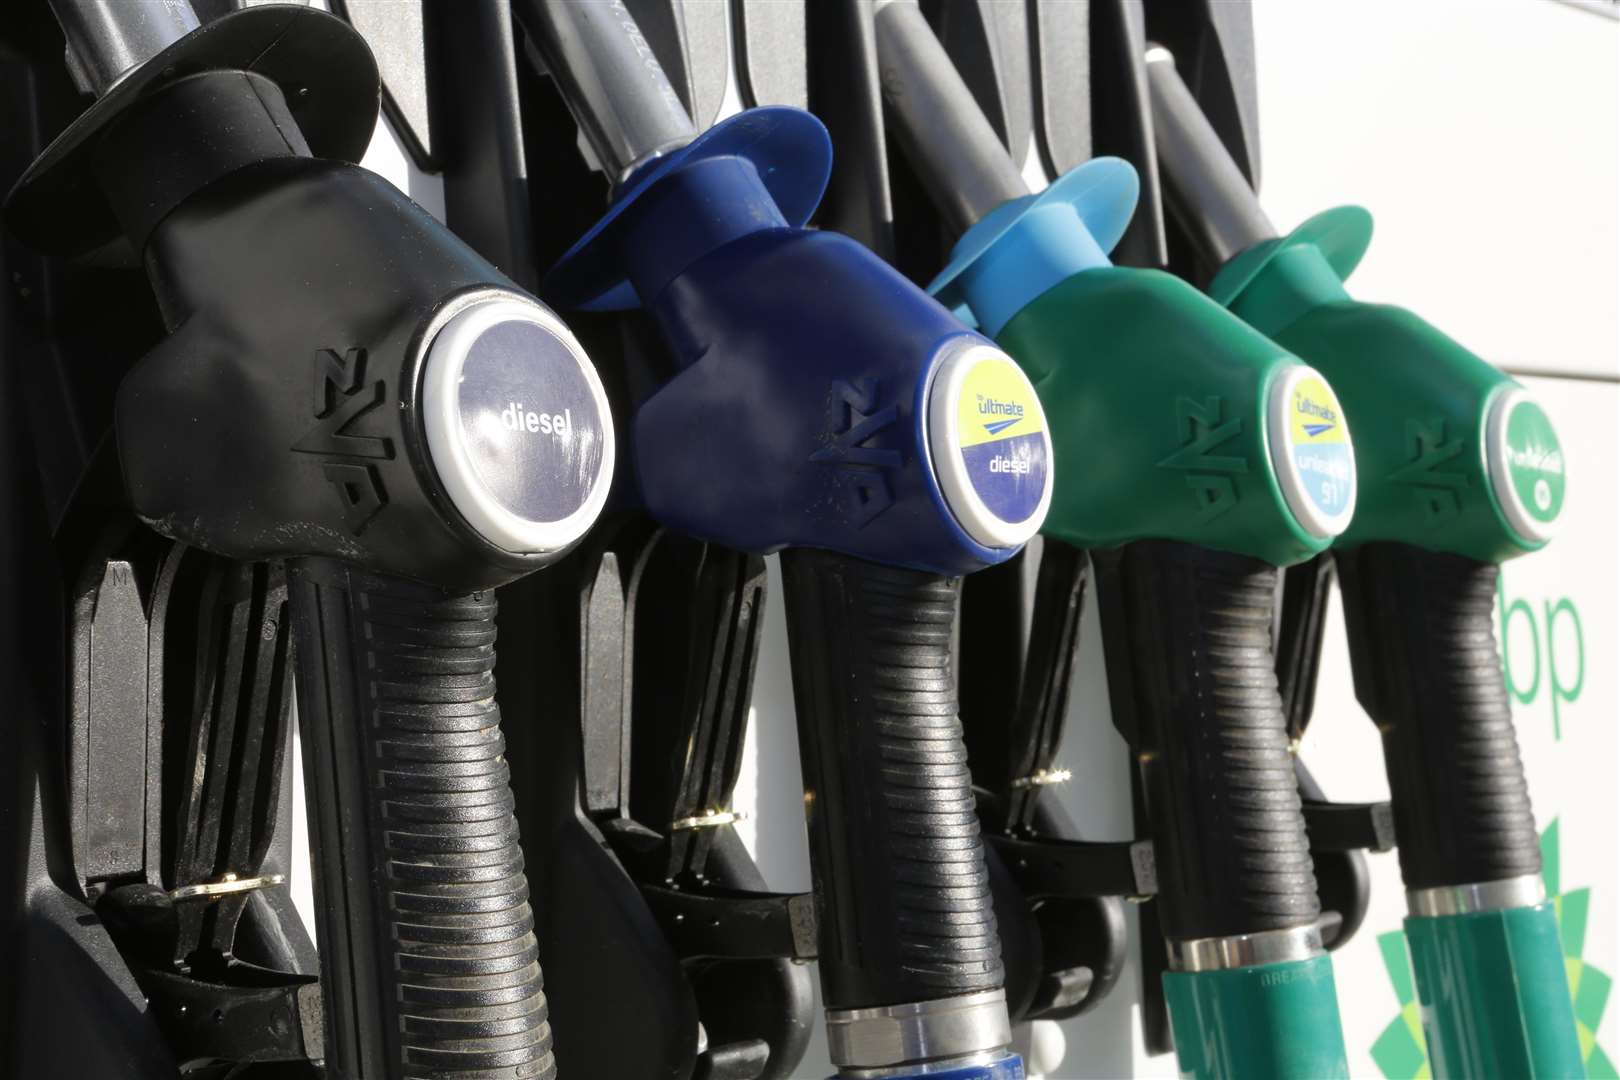 There is hope prices could dip if changes to fuel supplies are agreed